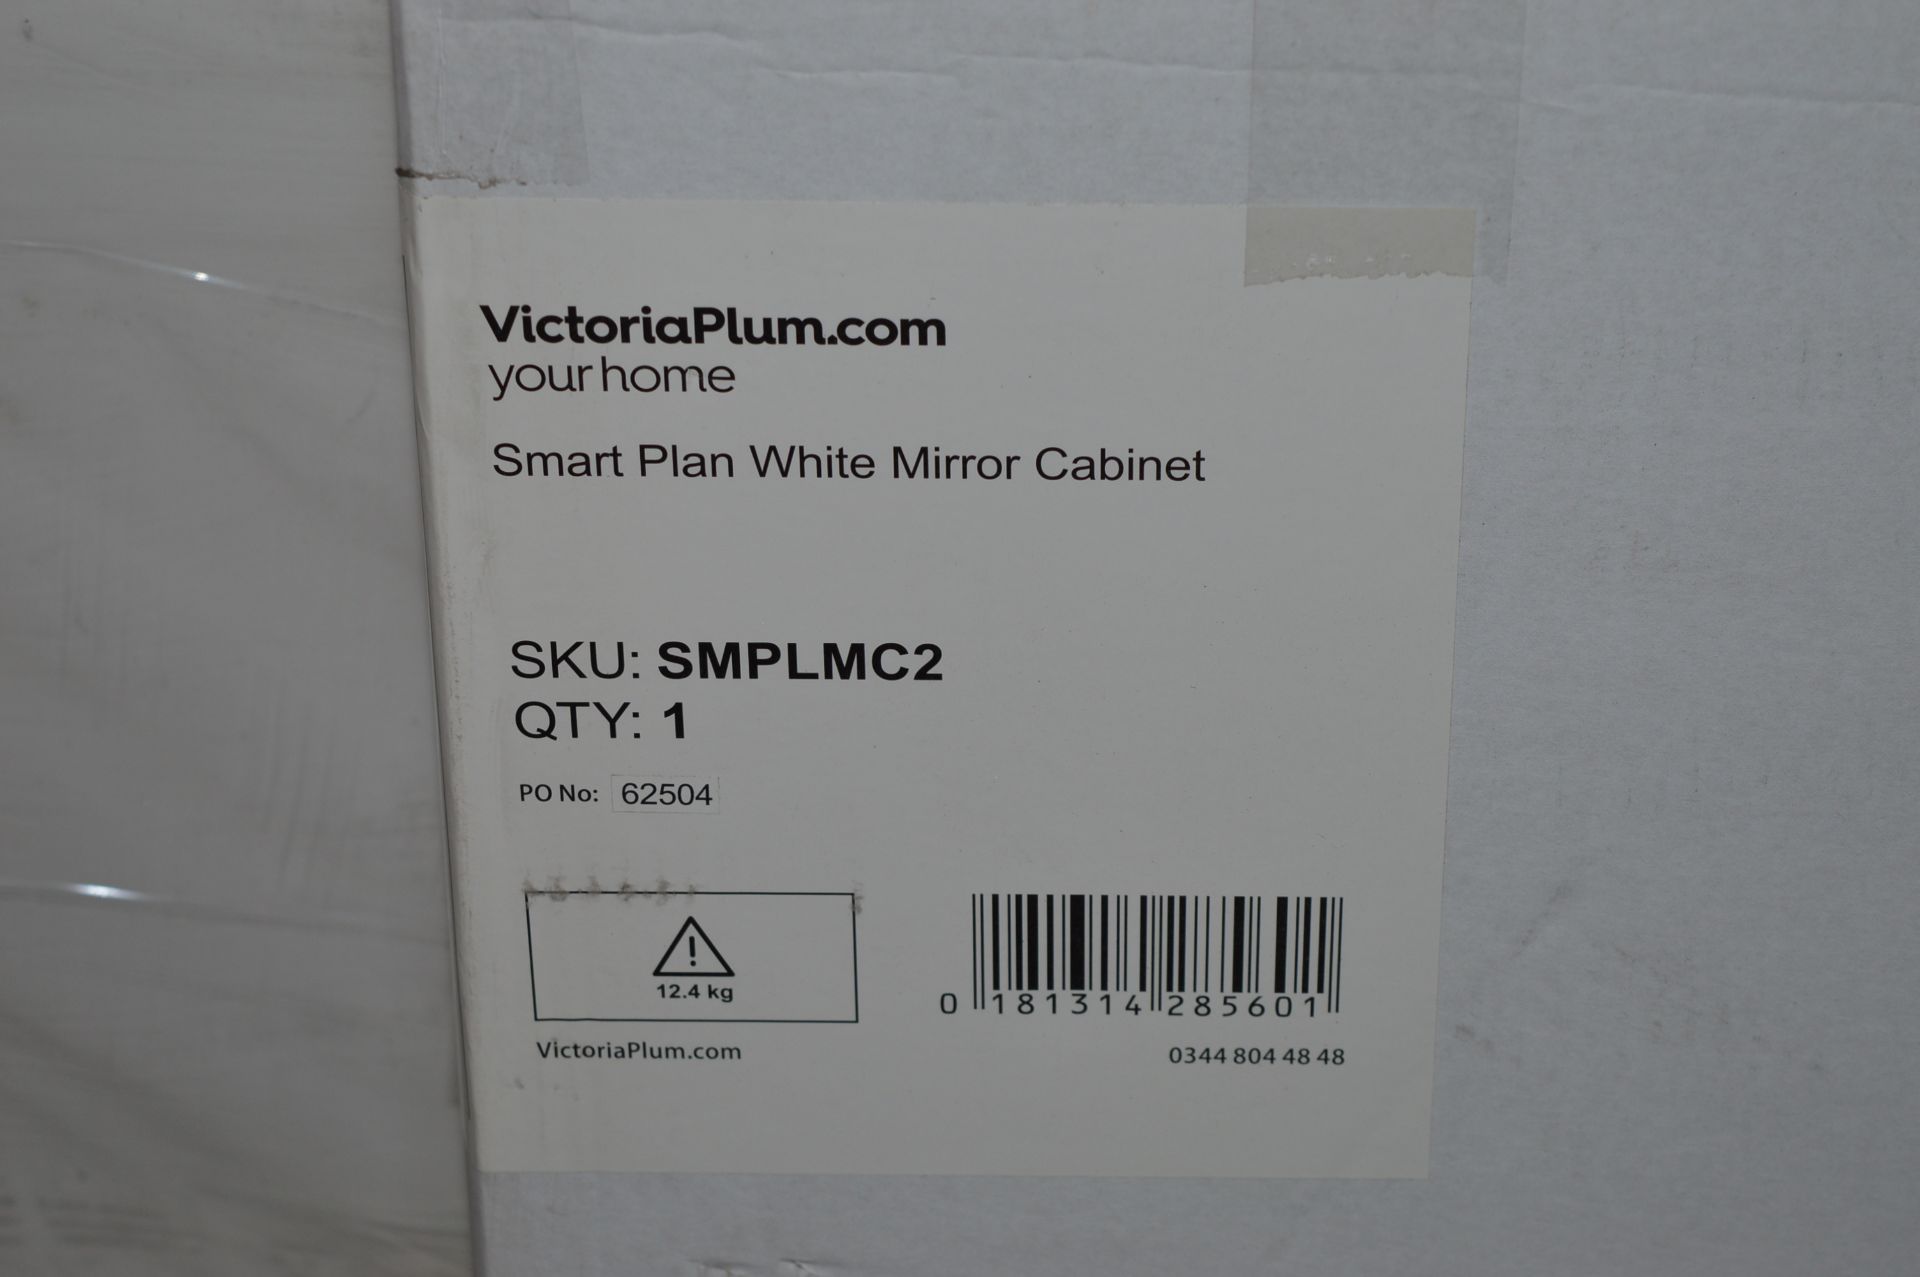 1 x Smart Plan White Mirrored Bathroom Cabinet -  Unused Stock - CL190 - Ref BOLT052 - H600 x W600 x - Image 3 of 3